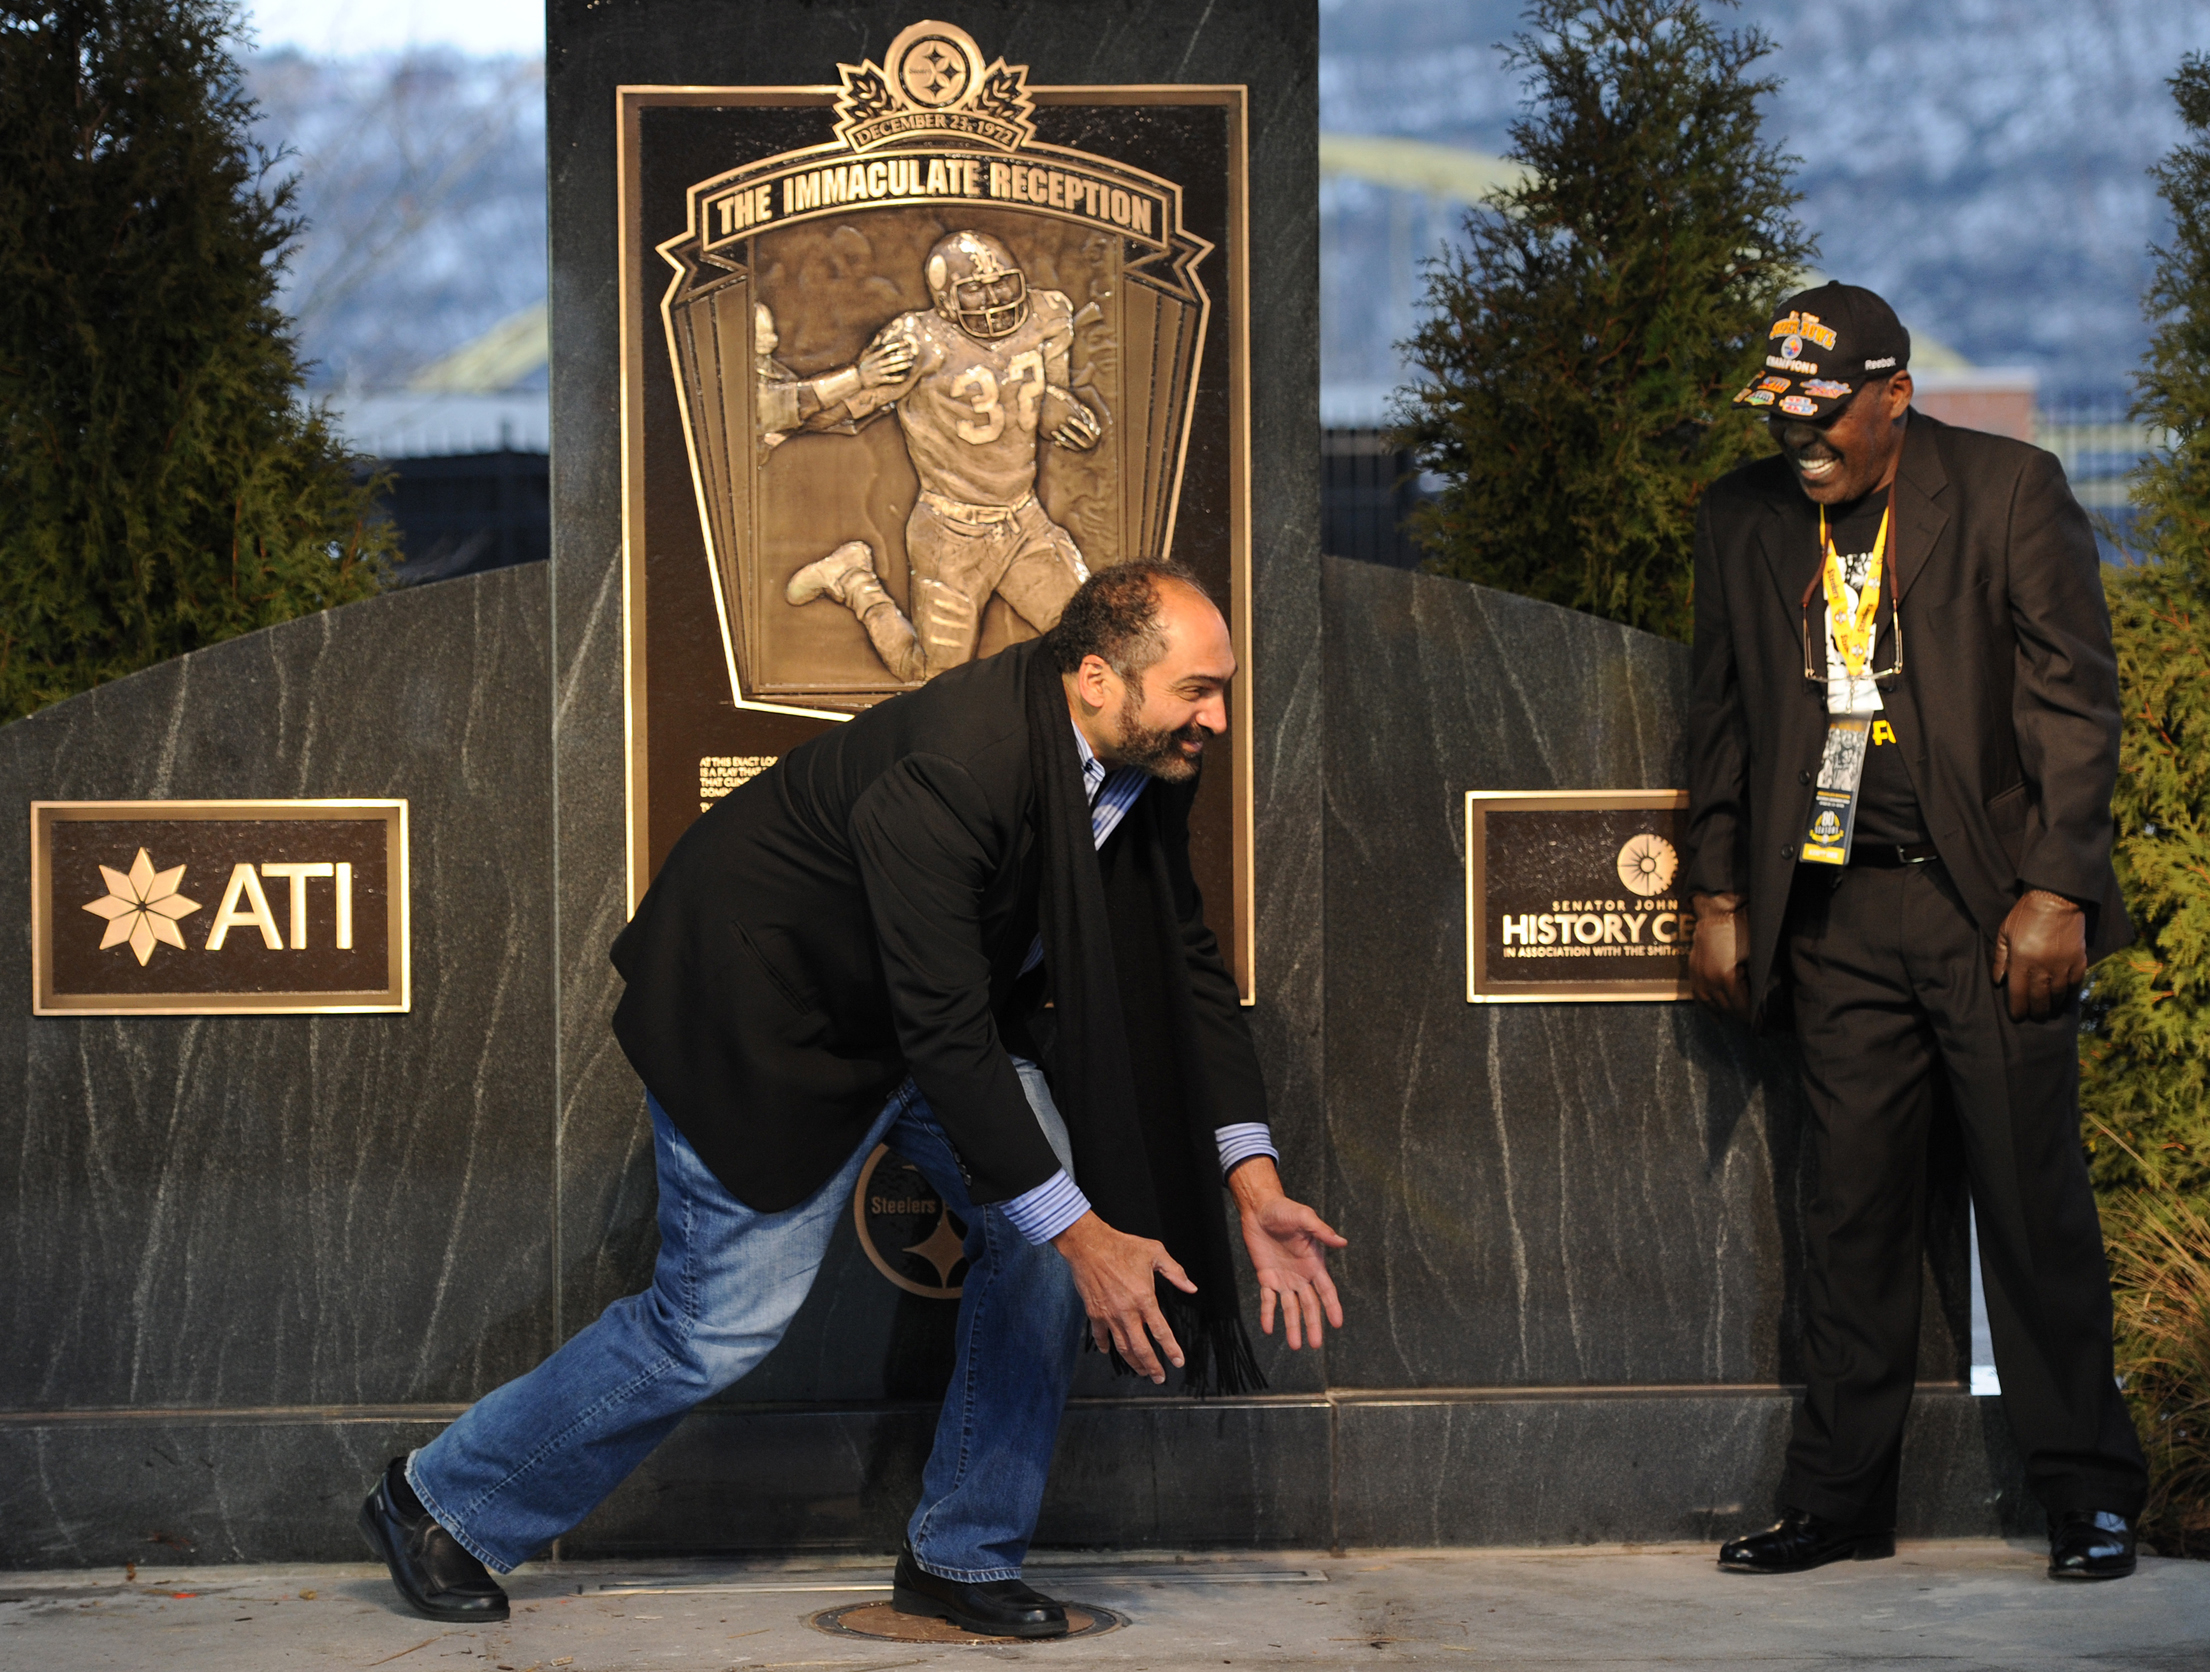 Franco Harris demonstrates the Immaculate Reception as John Frenchy Fuqua looks on at the unveiling of a historical marker designating the spot where the the play occurred on the North Side on Saturday, December 22, 2012. (Rebecca Droke/Post-Gazette)